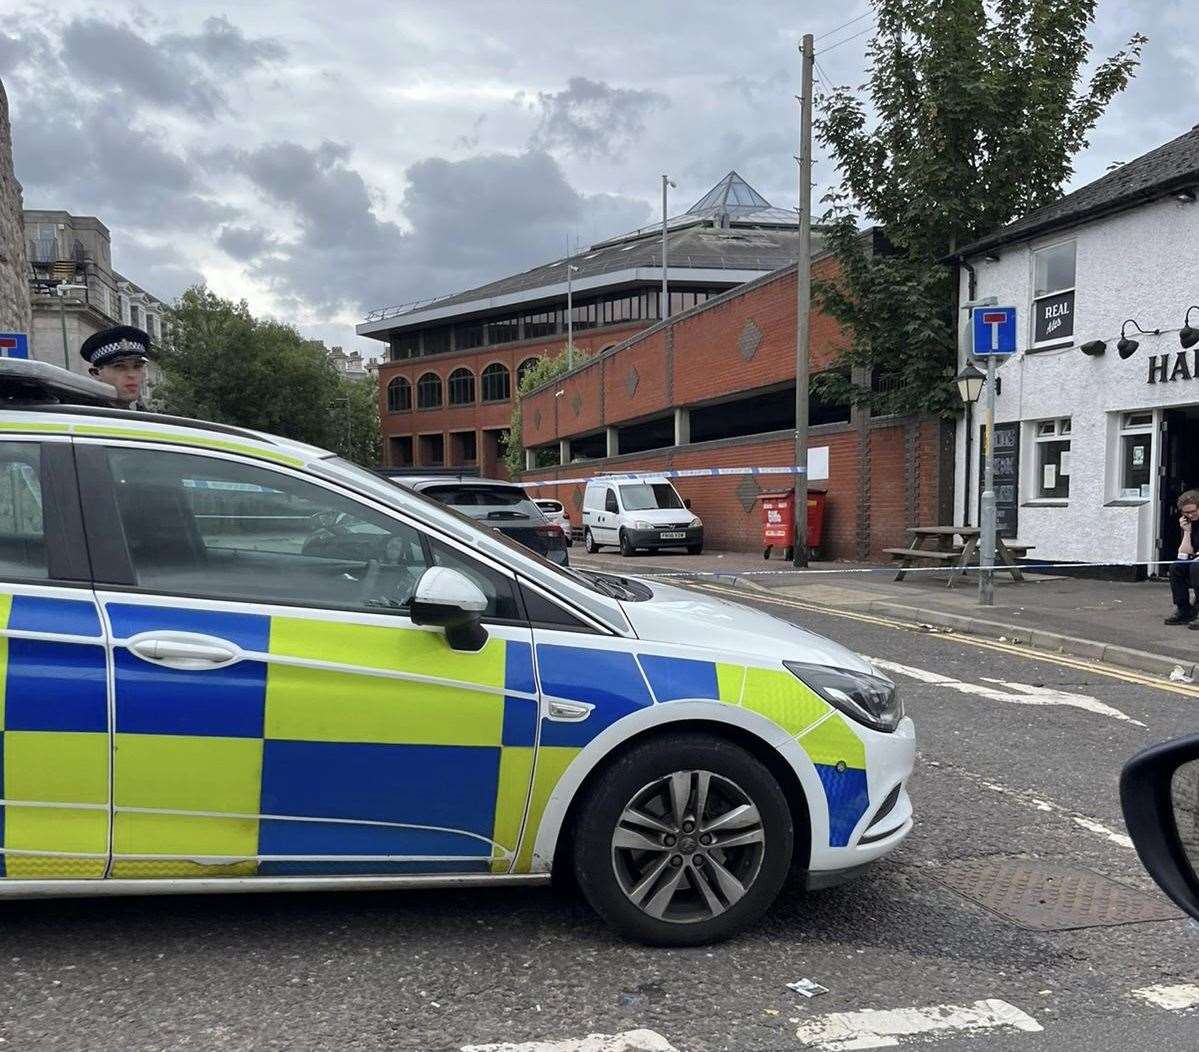 The Hare and Hounds was closed on Sunday morning as police carried out their investigations